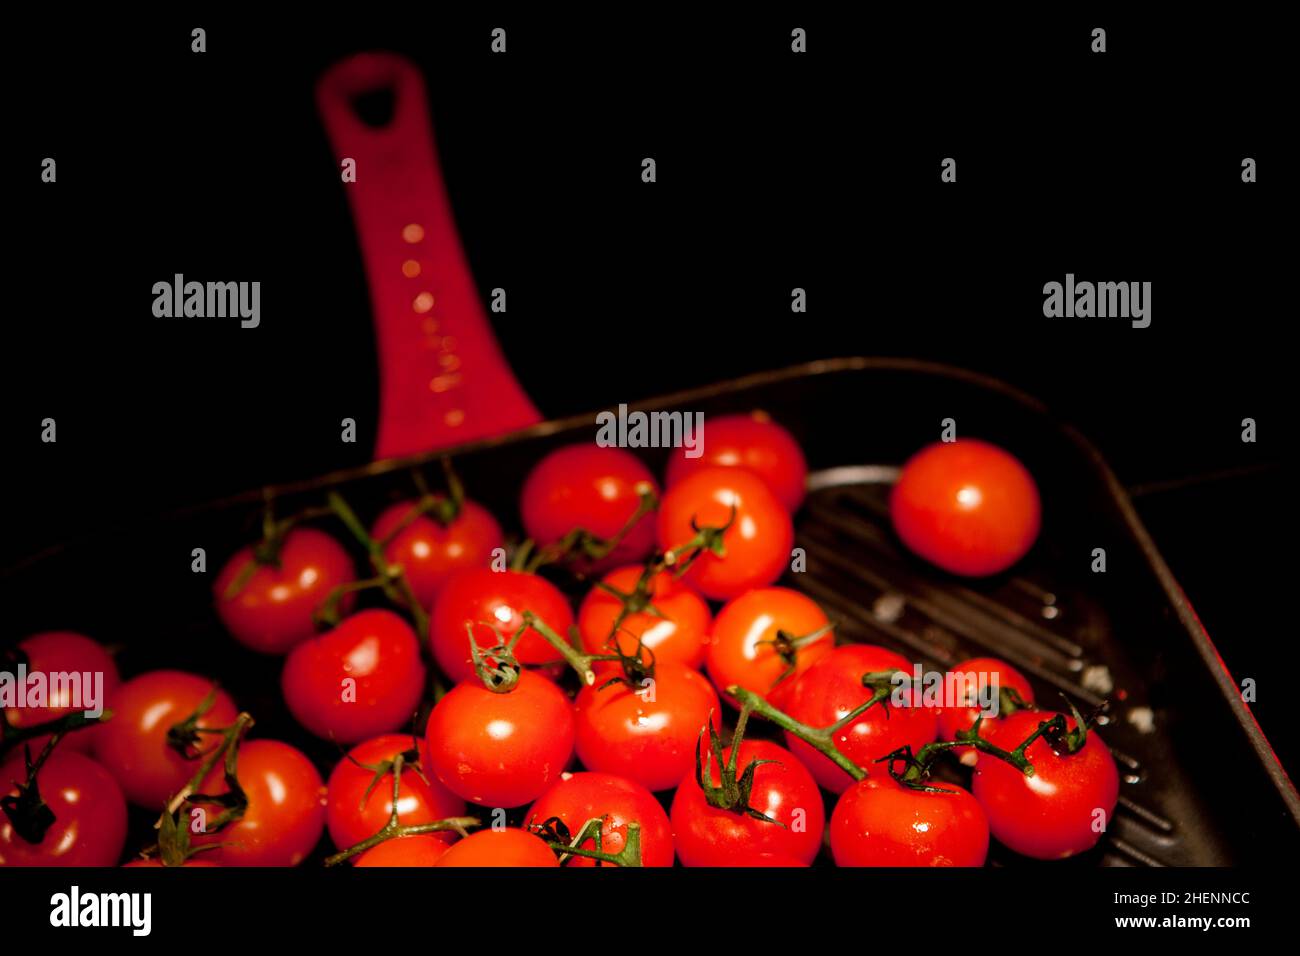 Ripe cherry tomatoes on a red-handled griddle. Stock Photo